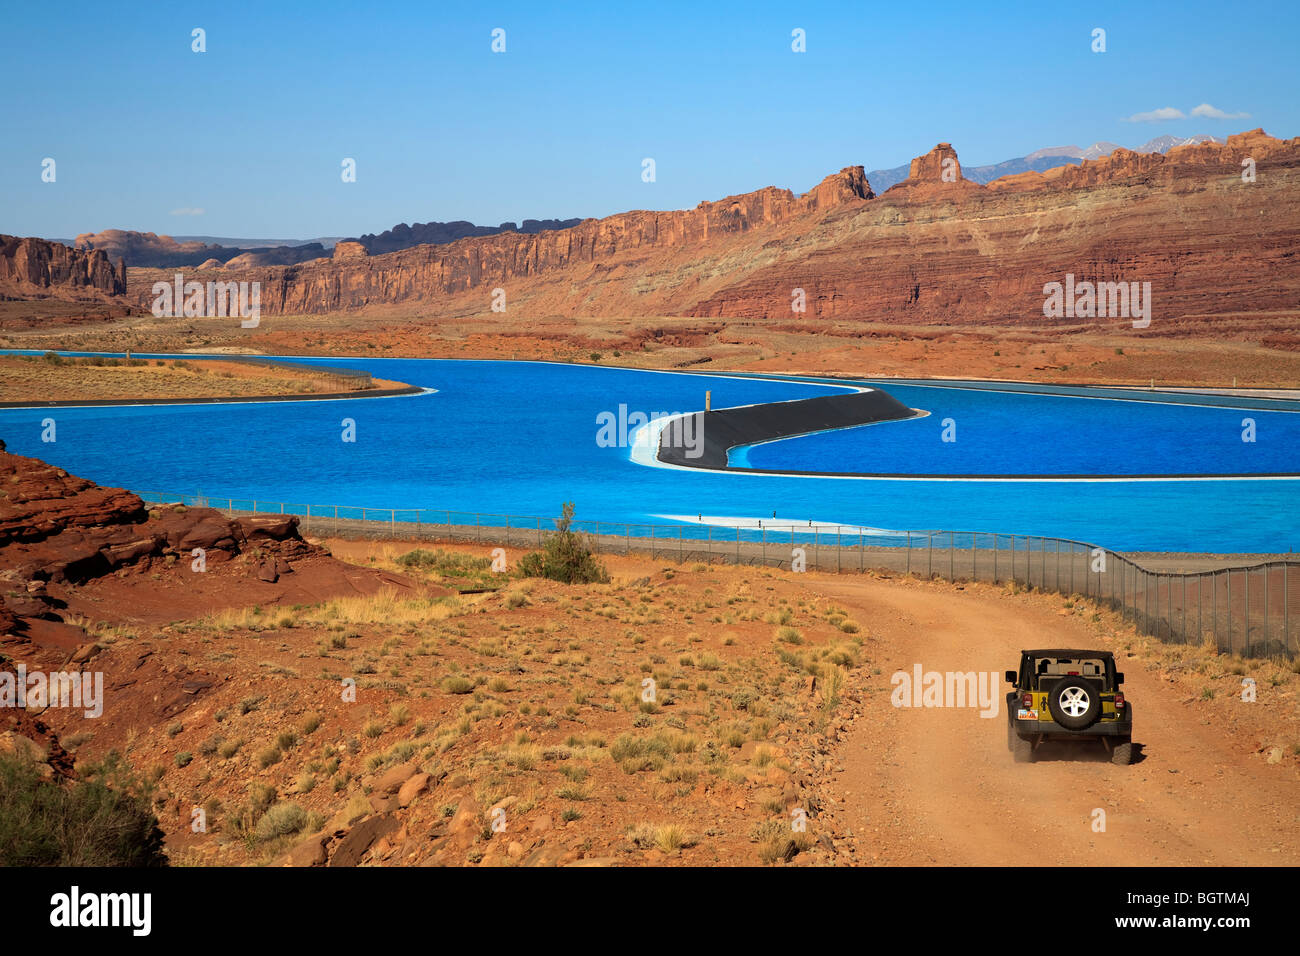 Scene overlooking the bight blue Cane Creek potash mine water evaporation ponds near Moab, Utah, USA and 4x4 truck in foreground Stock Photo